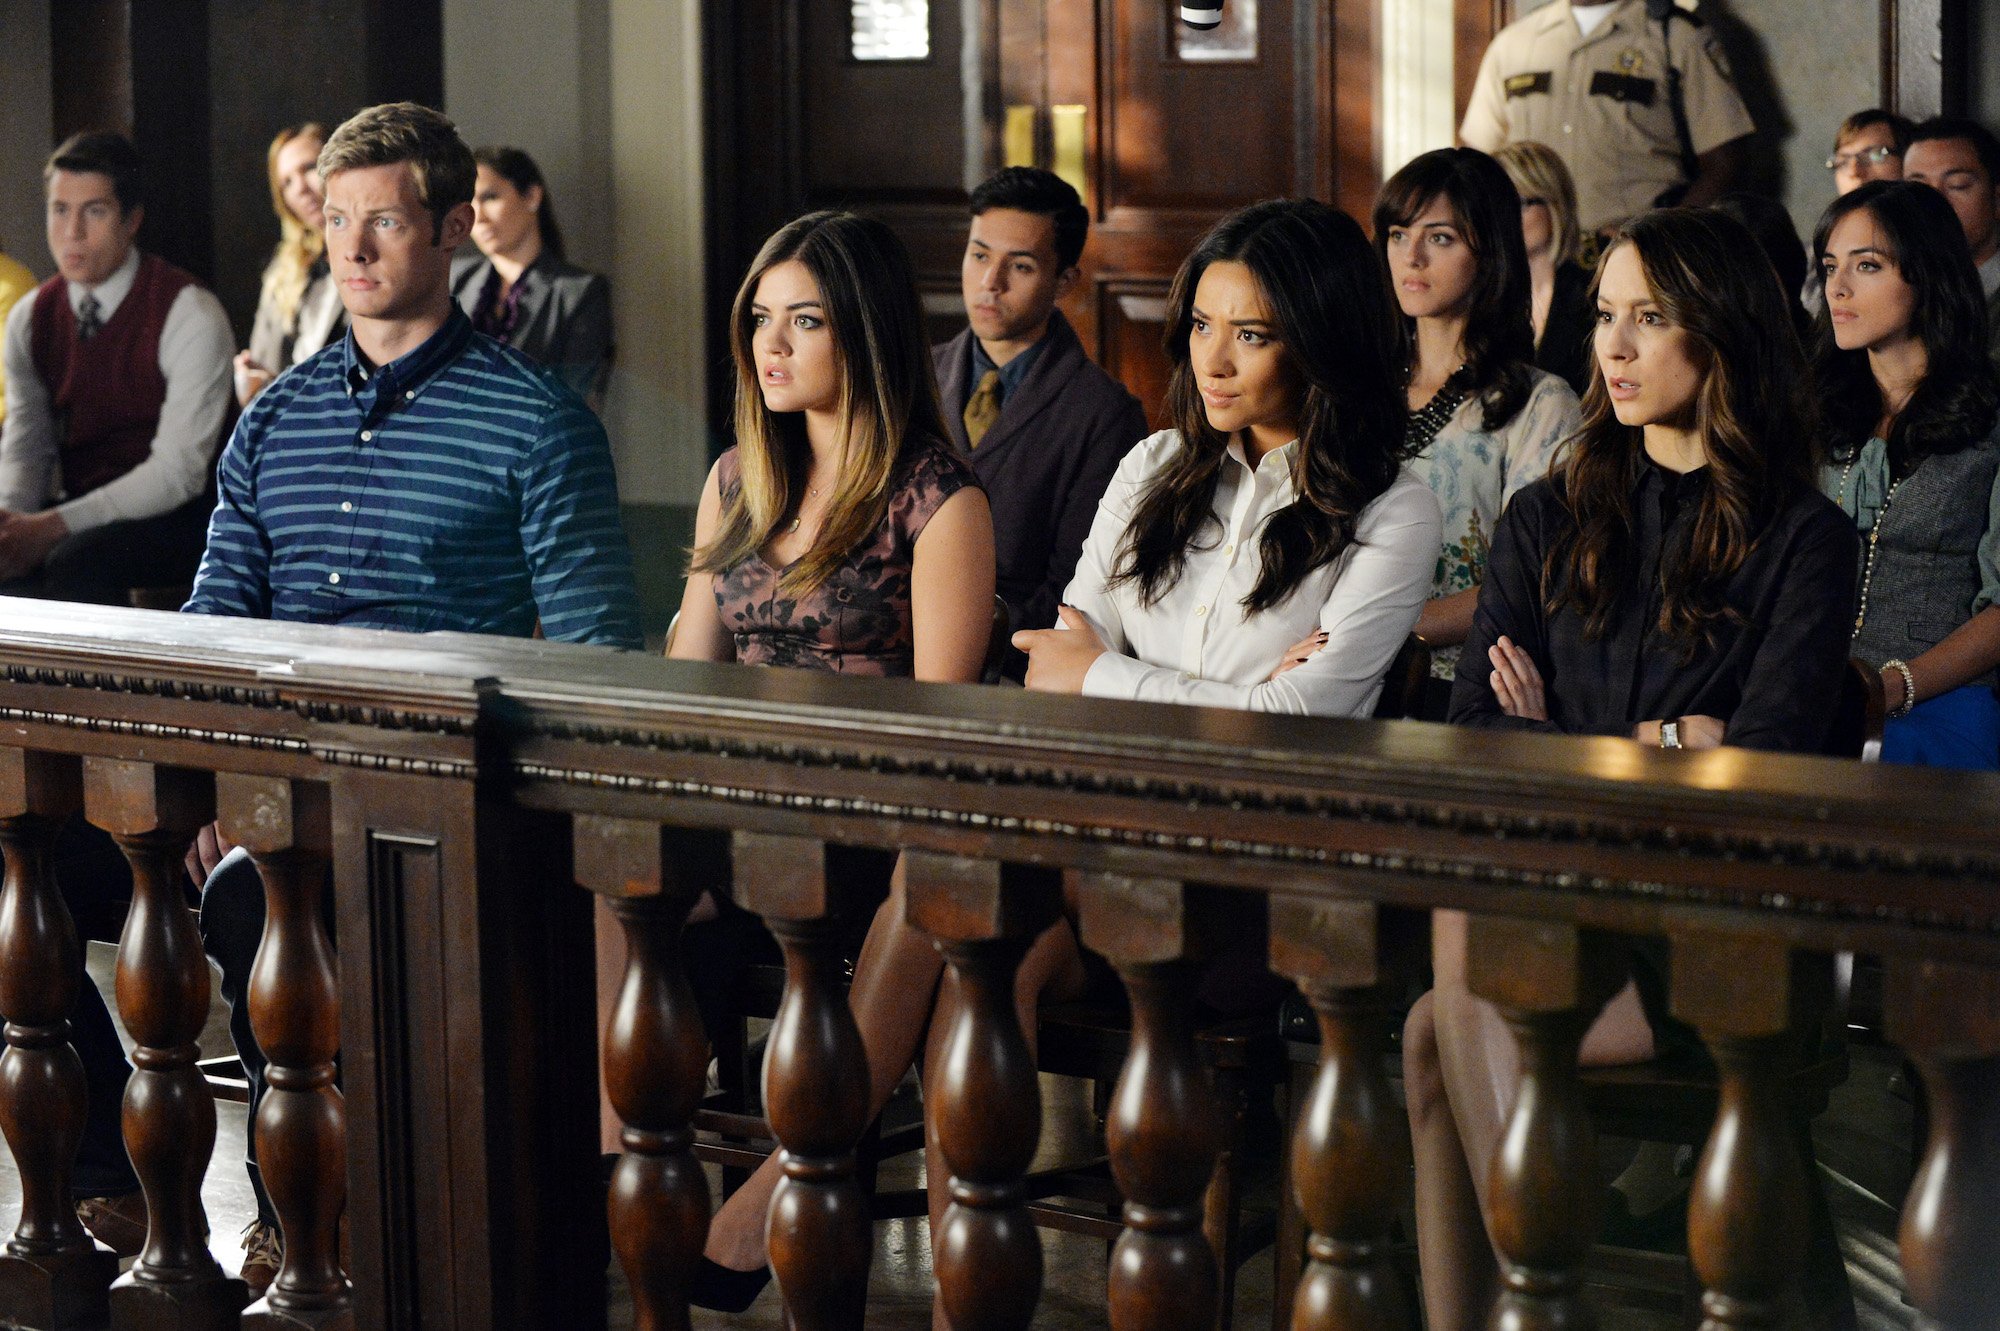 (L-R) Brandon Jones, Lucy Hale, Shay Mitchell, Troian Bellisario in a courtroom on Pretty Little Liars